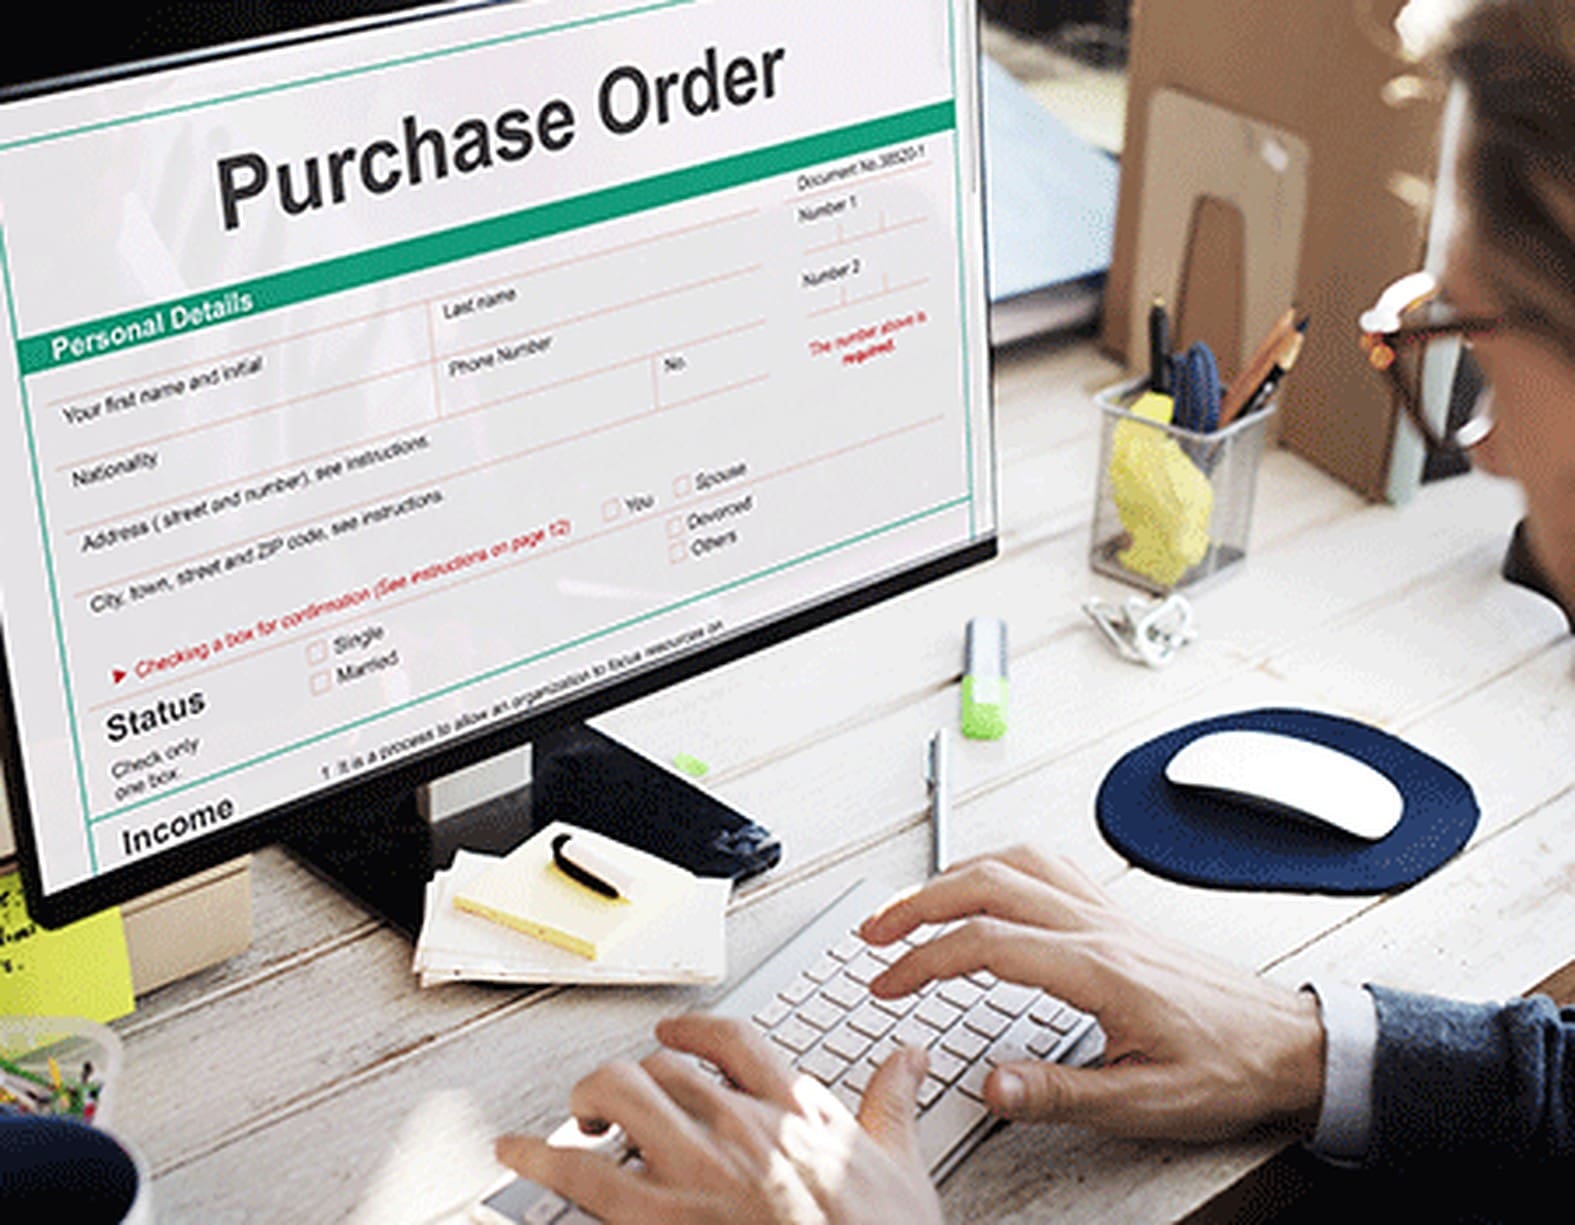 4 Steps to Create a Purchase Order in QuickBooks